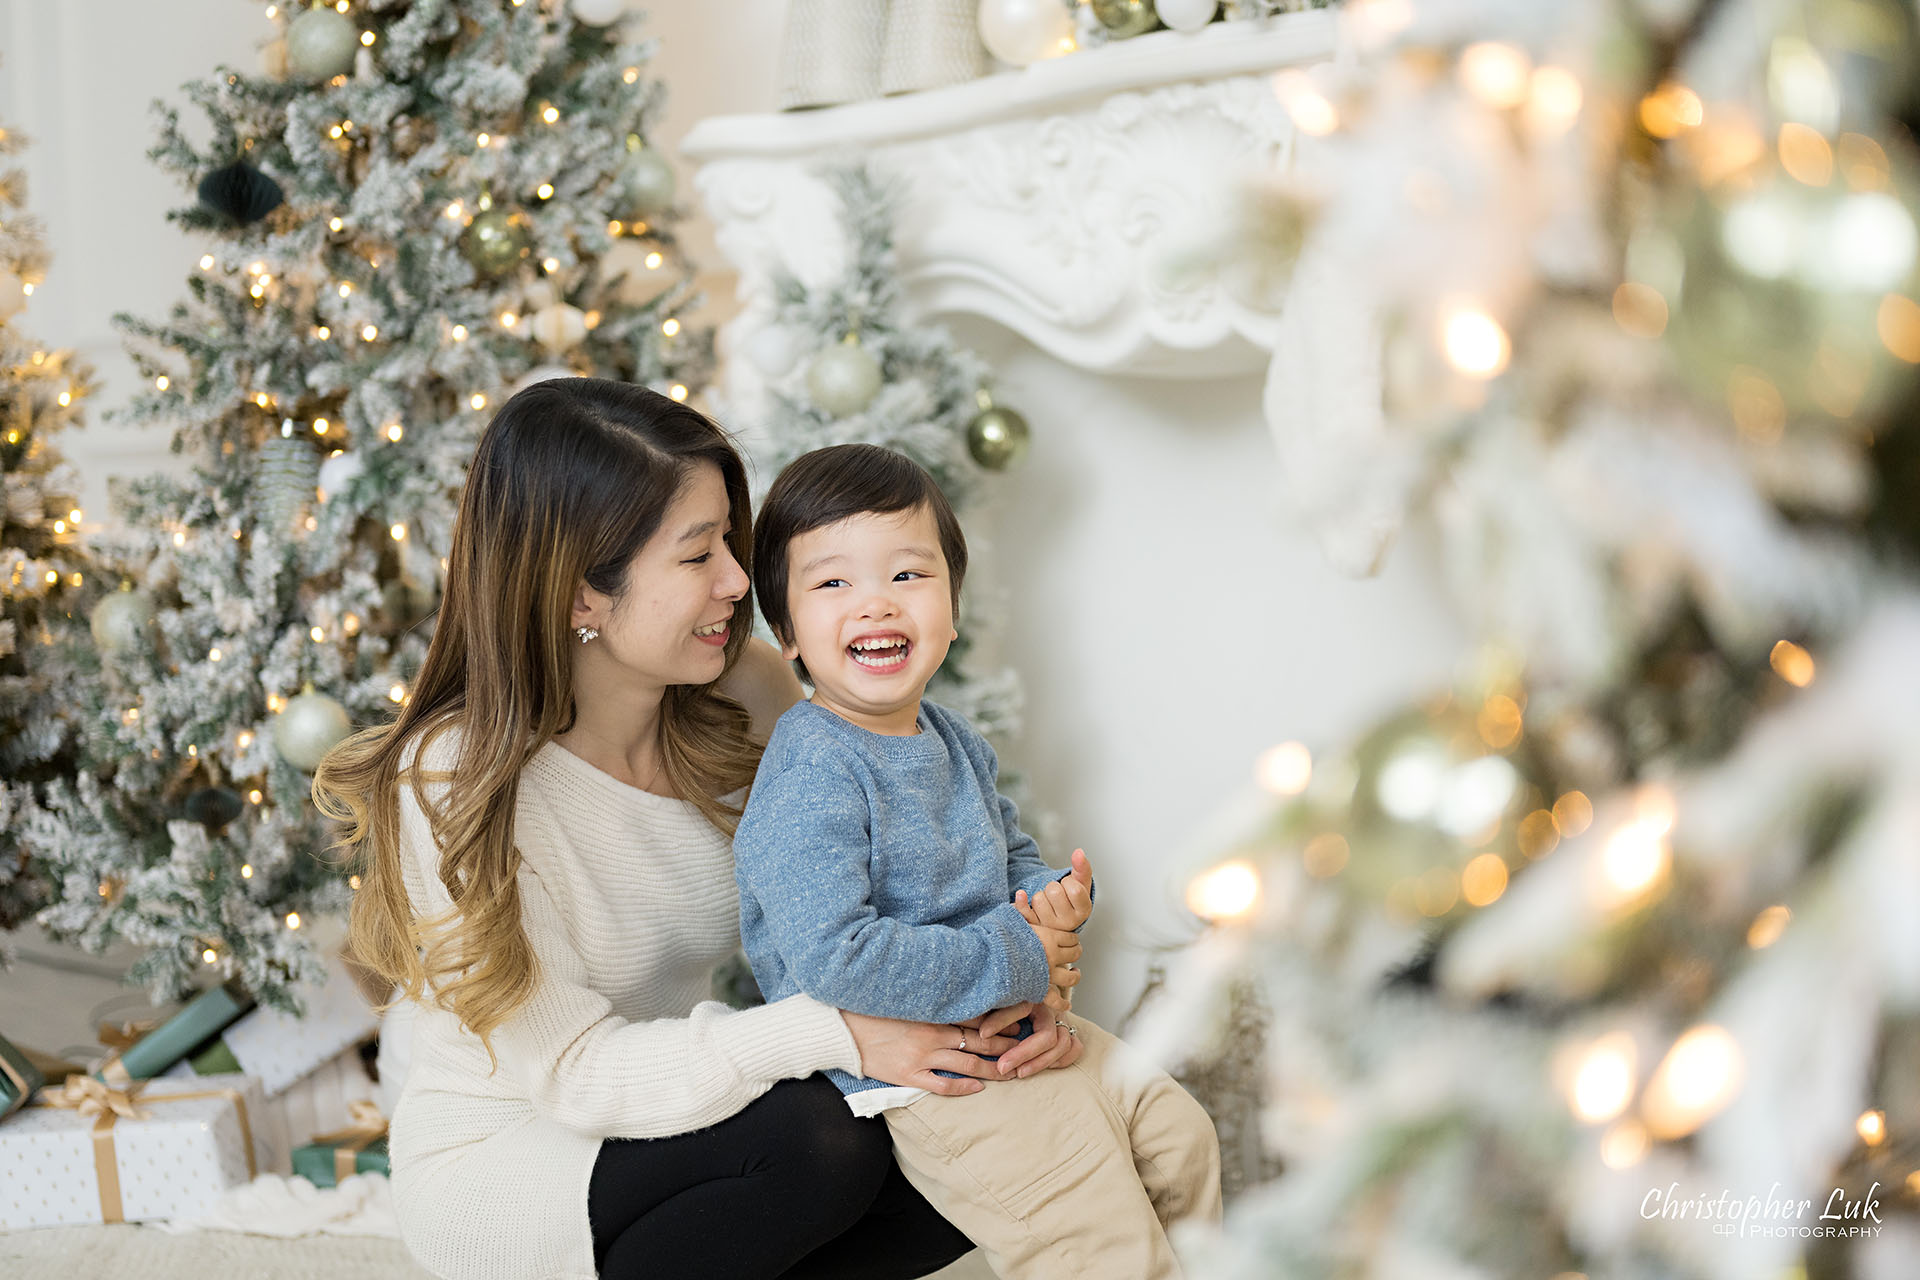 Christmas Family Photos Toronto Markham Holiday Festive Studio Pictures Photographer Natural Candid Photojournalistic Organic Mother Son Smile Playful 